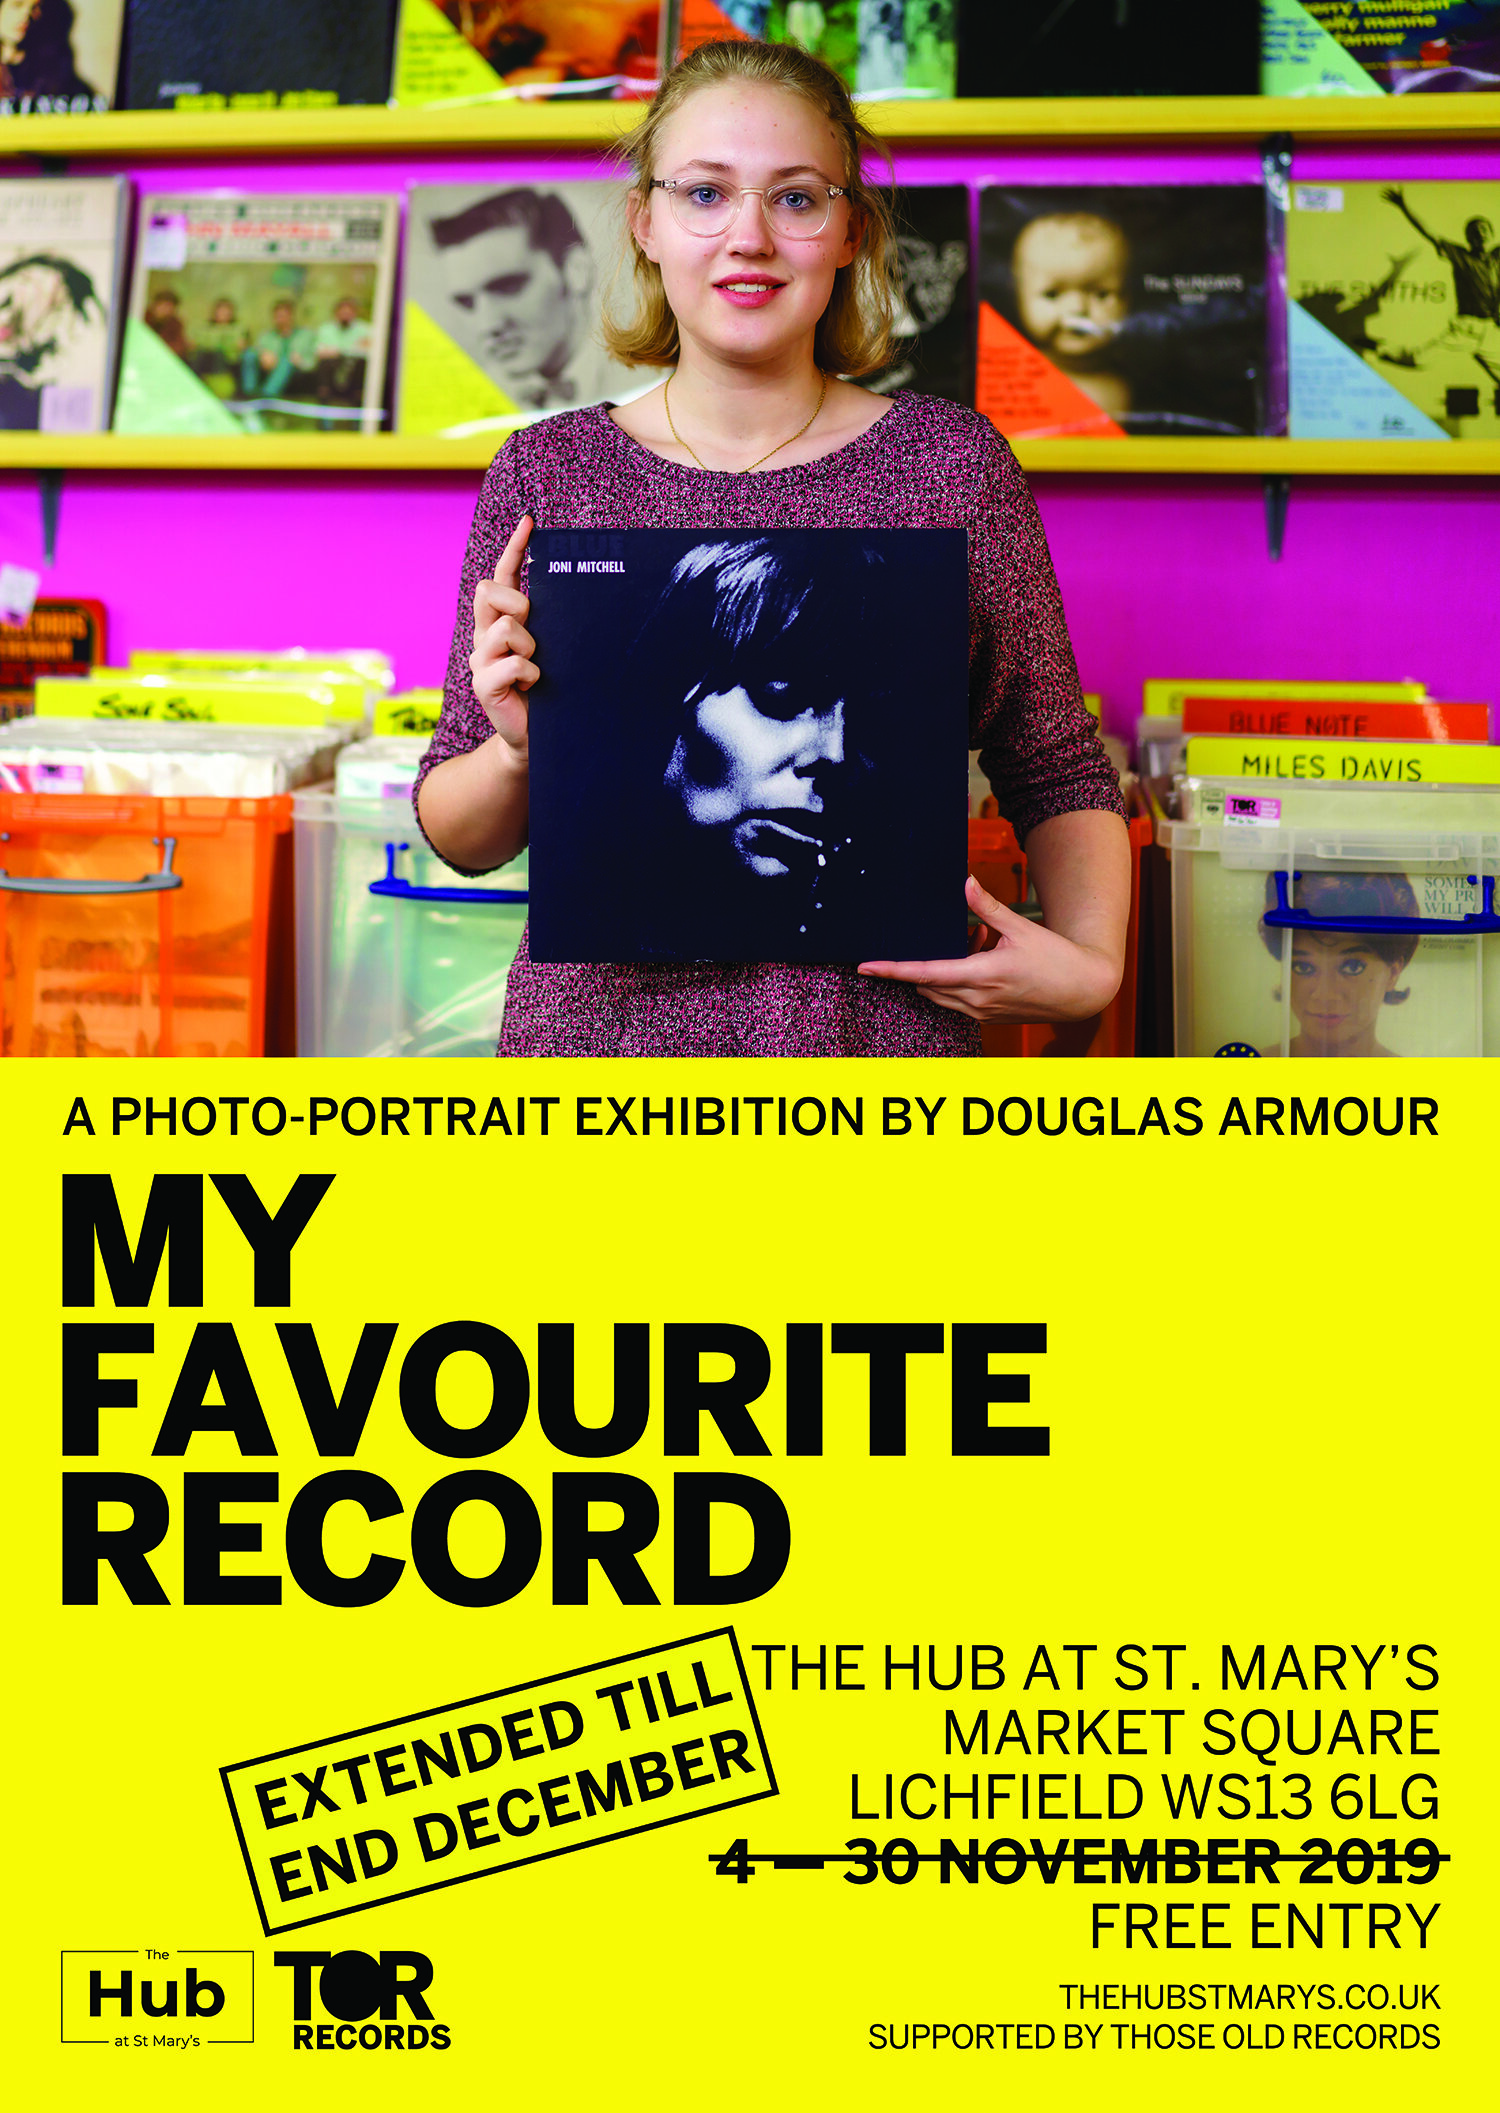 My Favourite Record Exhibition Poster